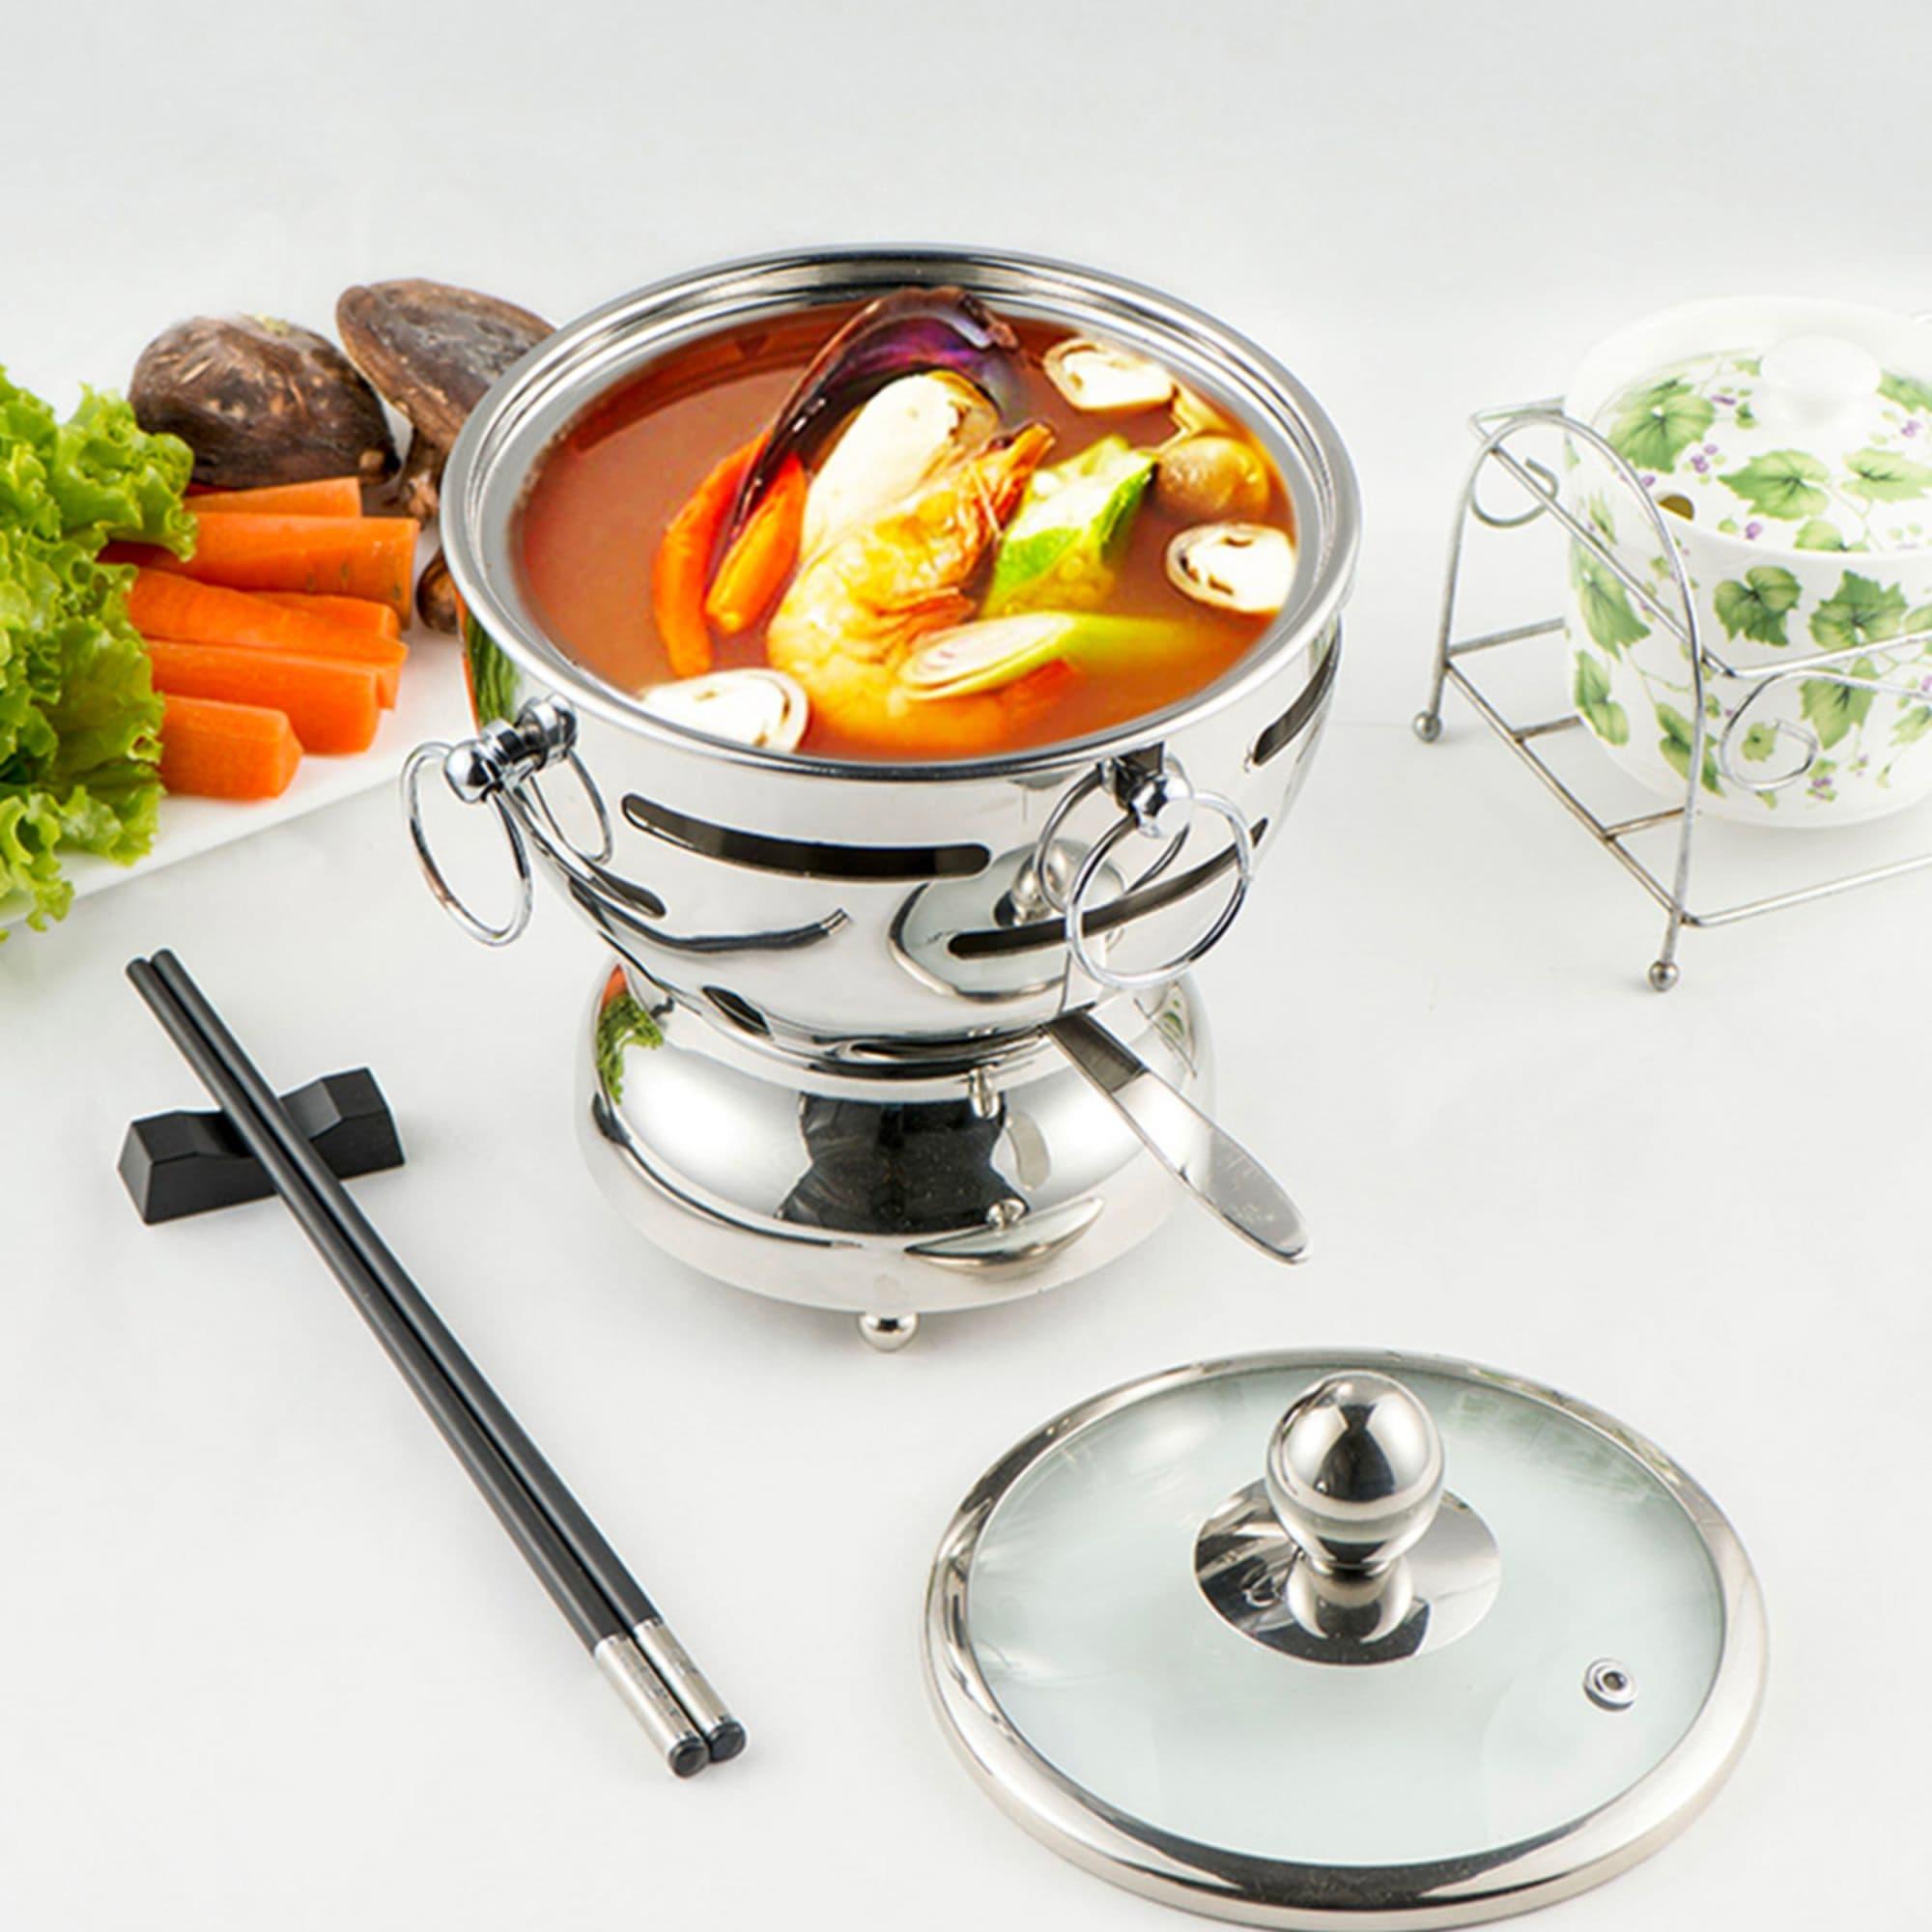 Soga Round Stainless Steel Single Hot Pot with Glass Lid 18.5cm Set of 2 Image 3